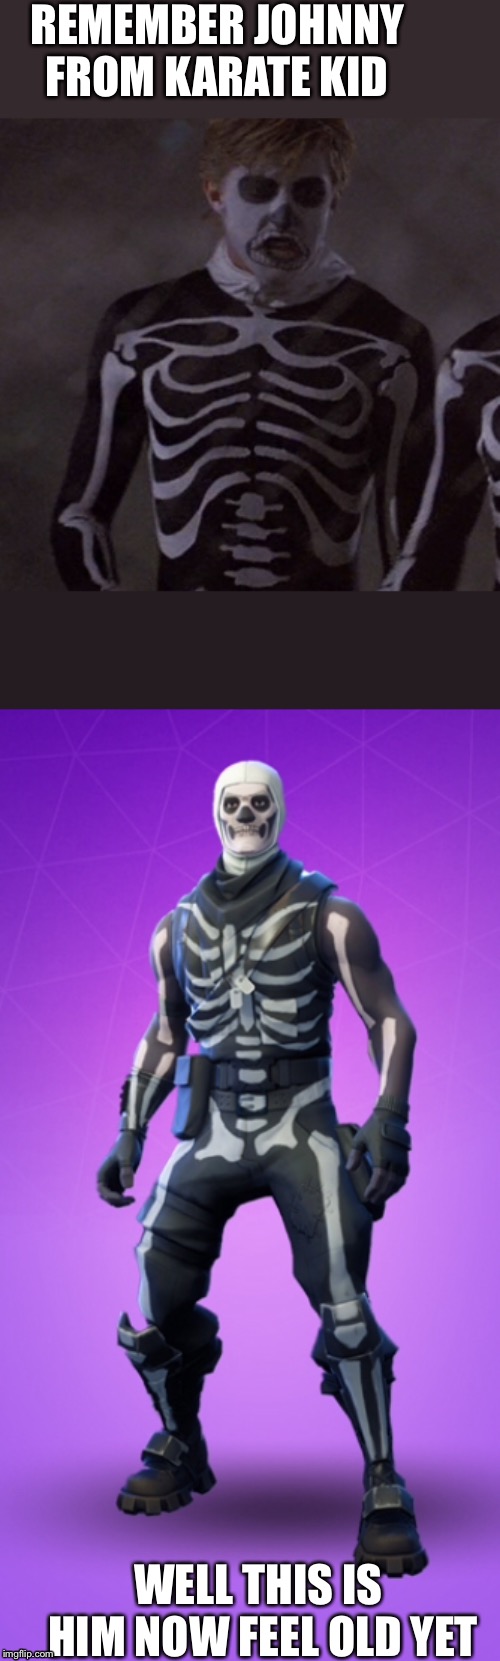 Remember this guy  | REMEMBER JOHNNY FROM KARATE KID; WELL THIS IS HIM NOW FEEL OLD YET | image tagged in karate kid,fortnite | made w/ Imgflip meme maker